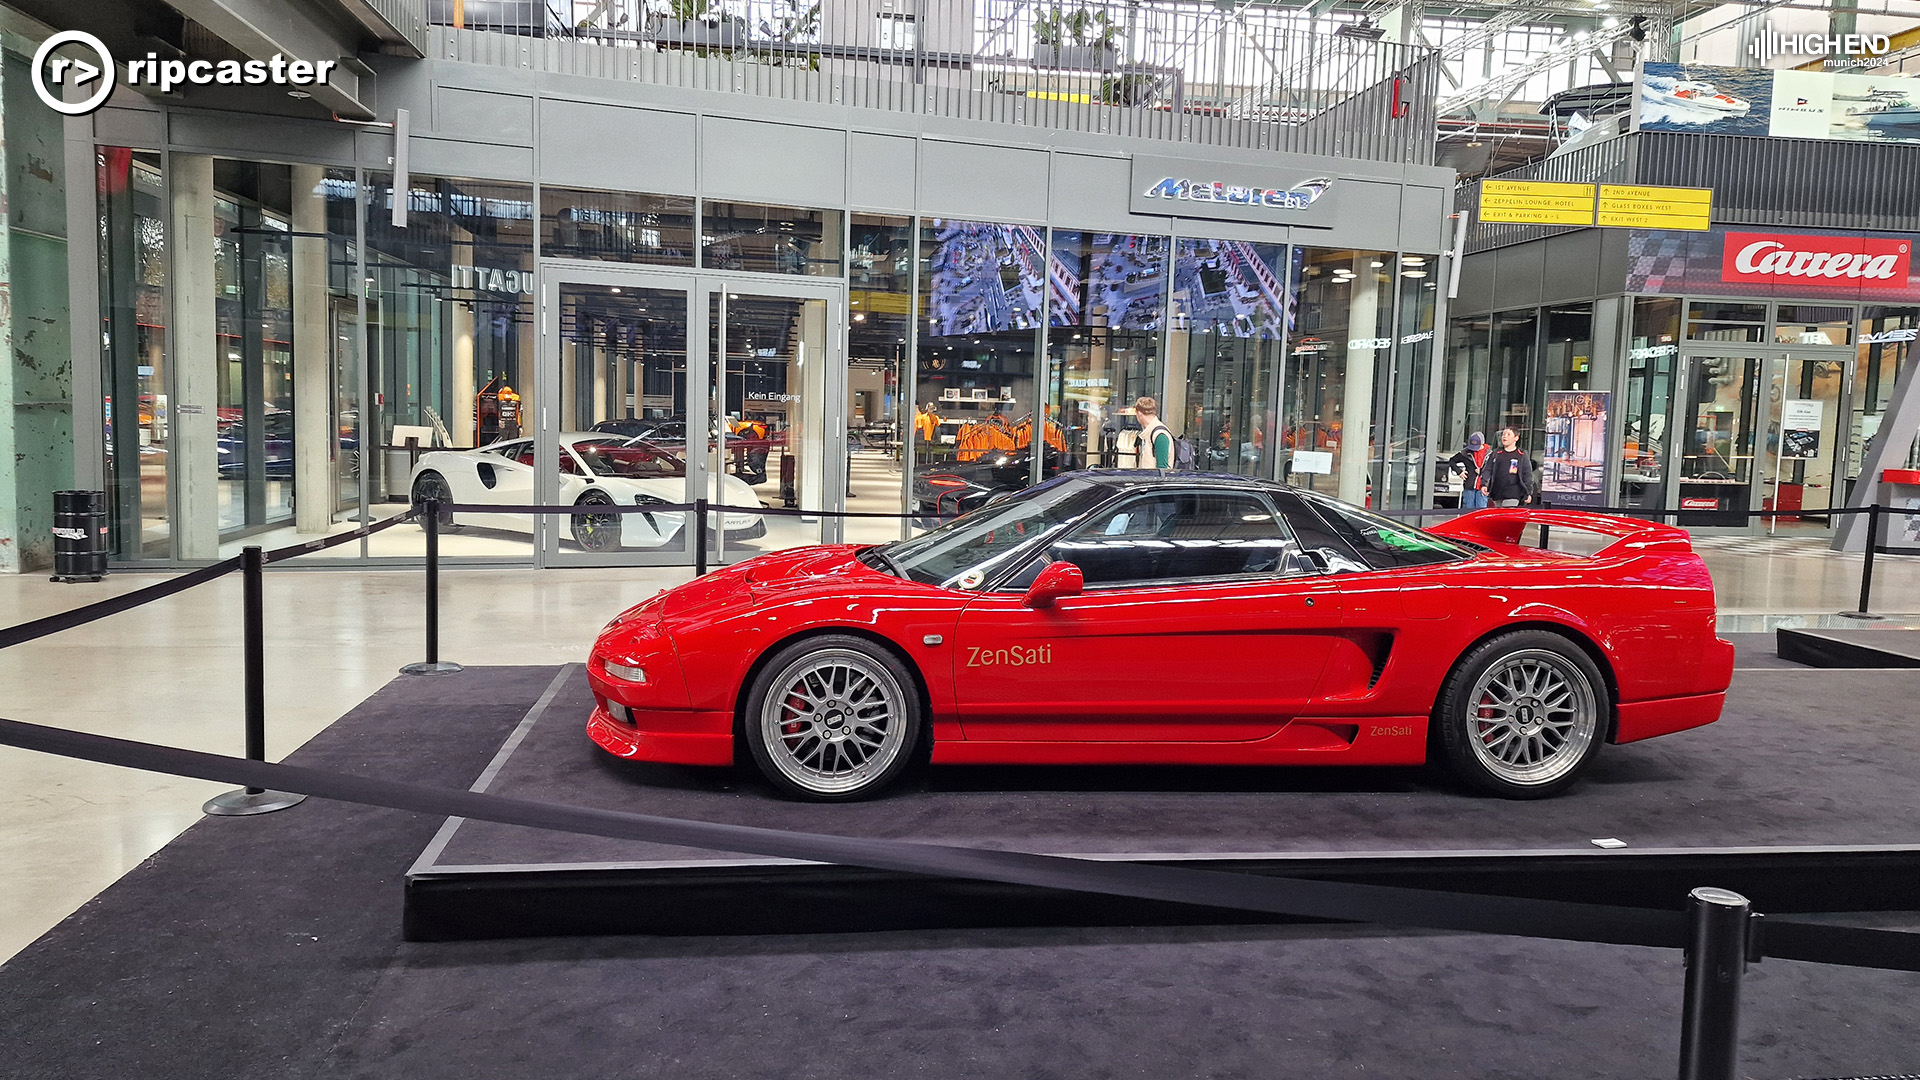 A red sports car in front of glass rooms with other sports cars inside